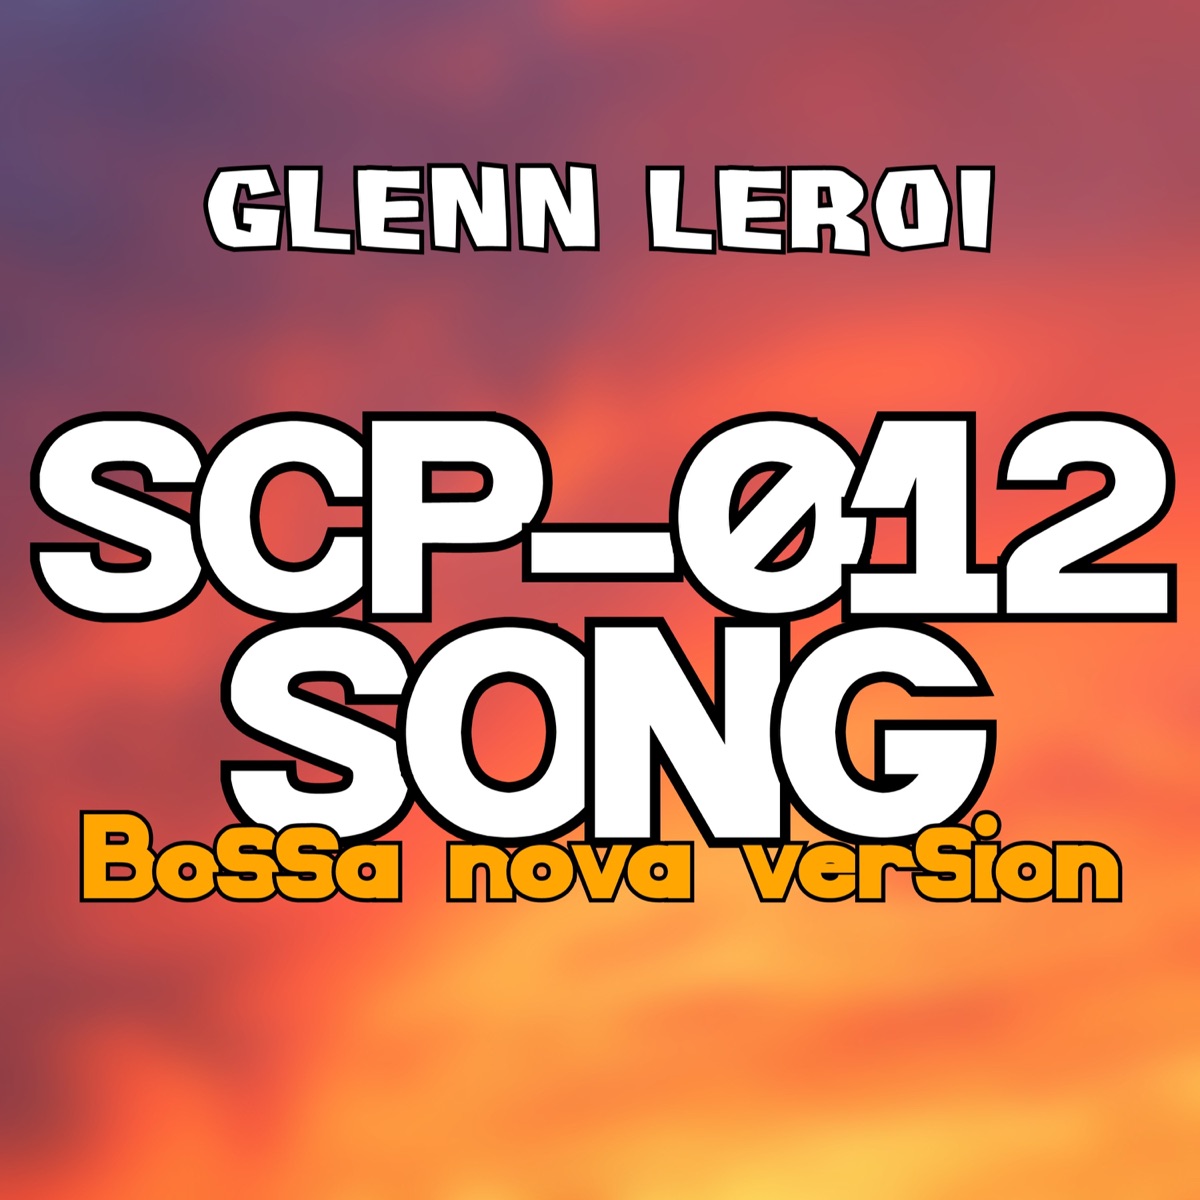 SCP-008 song